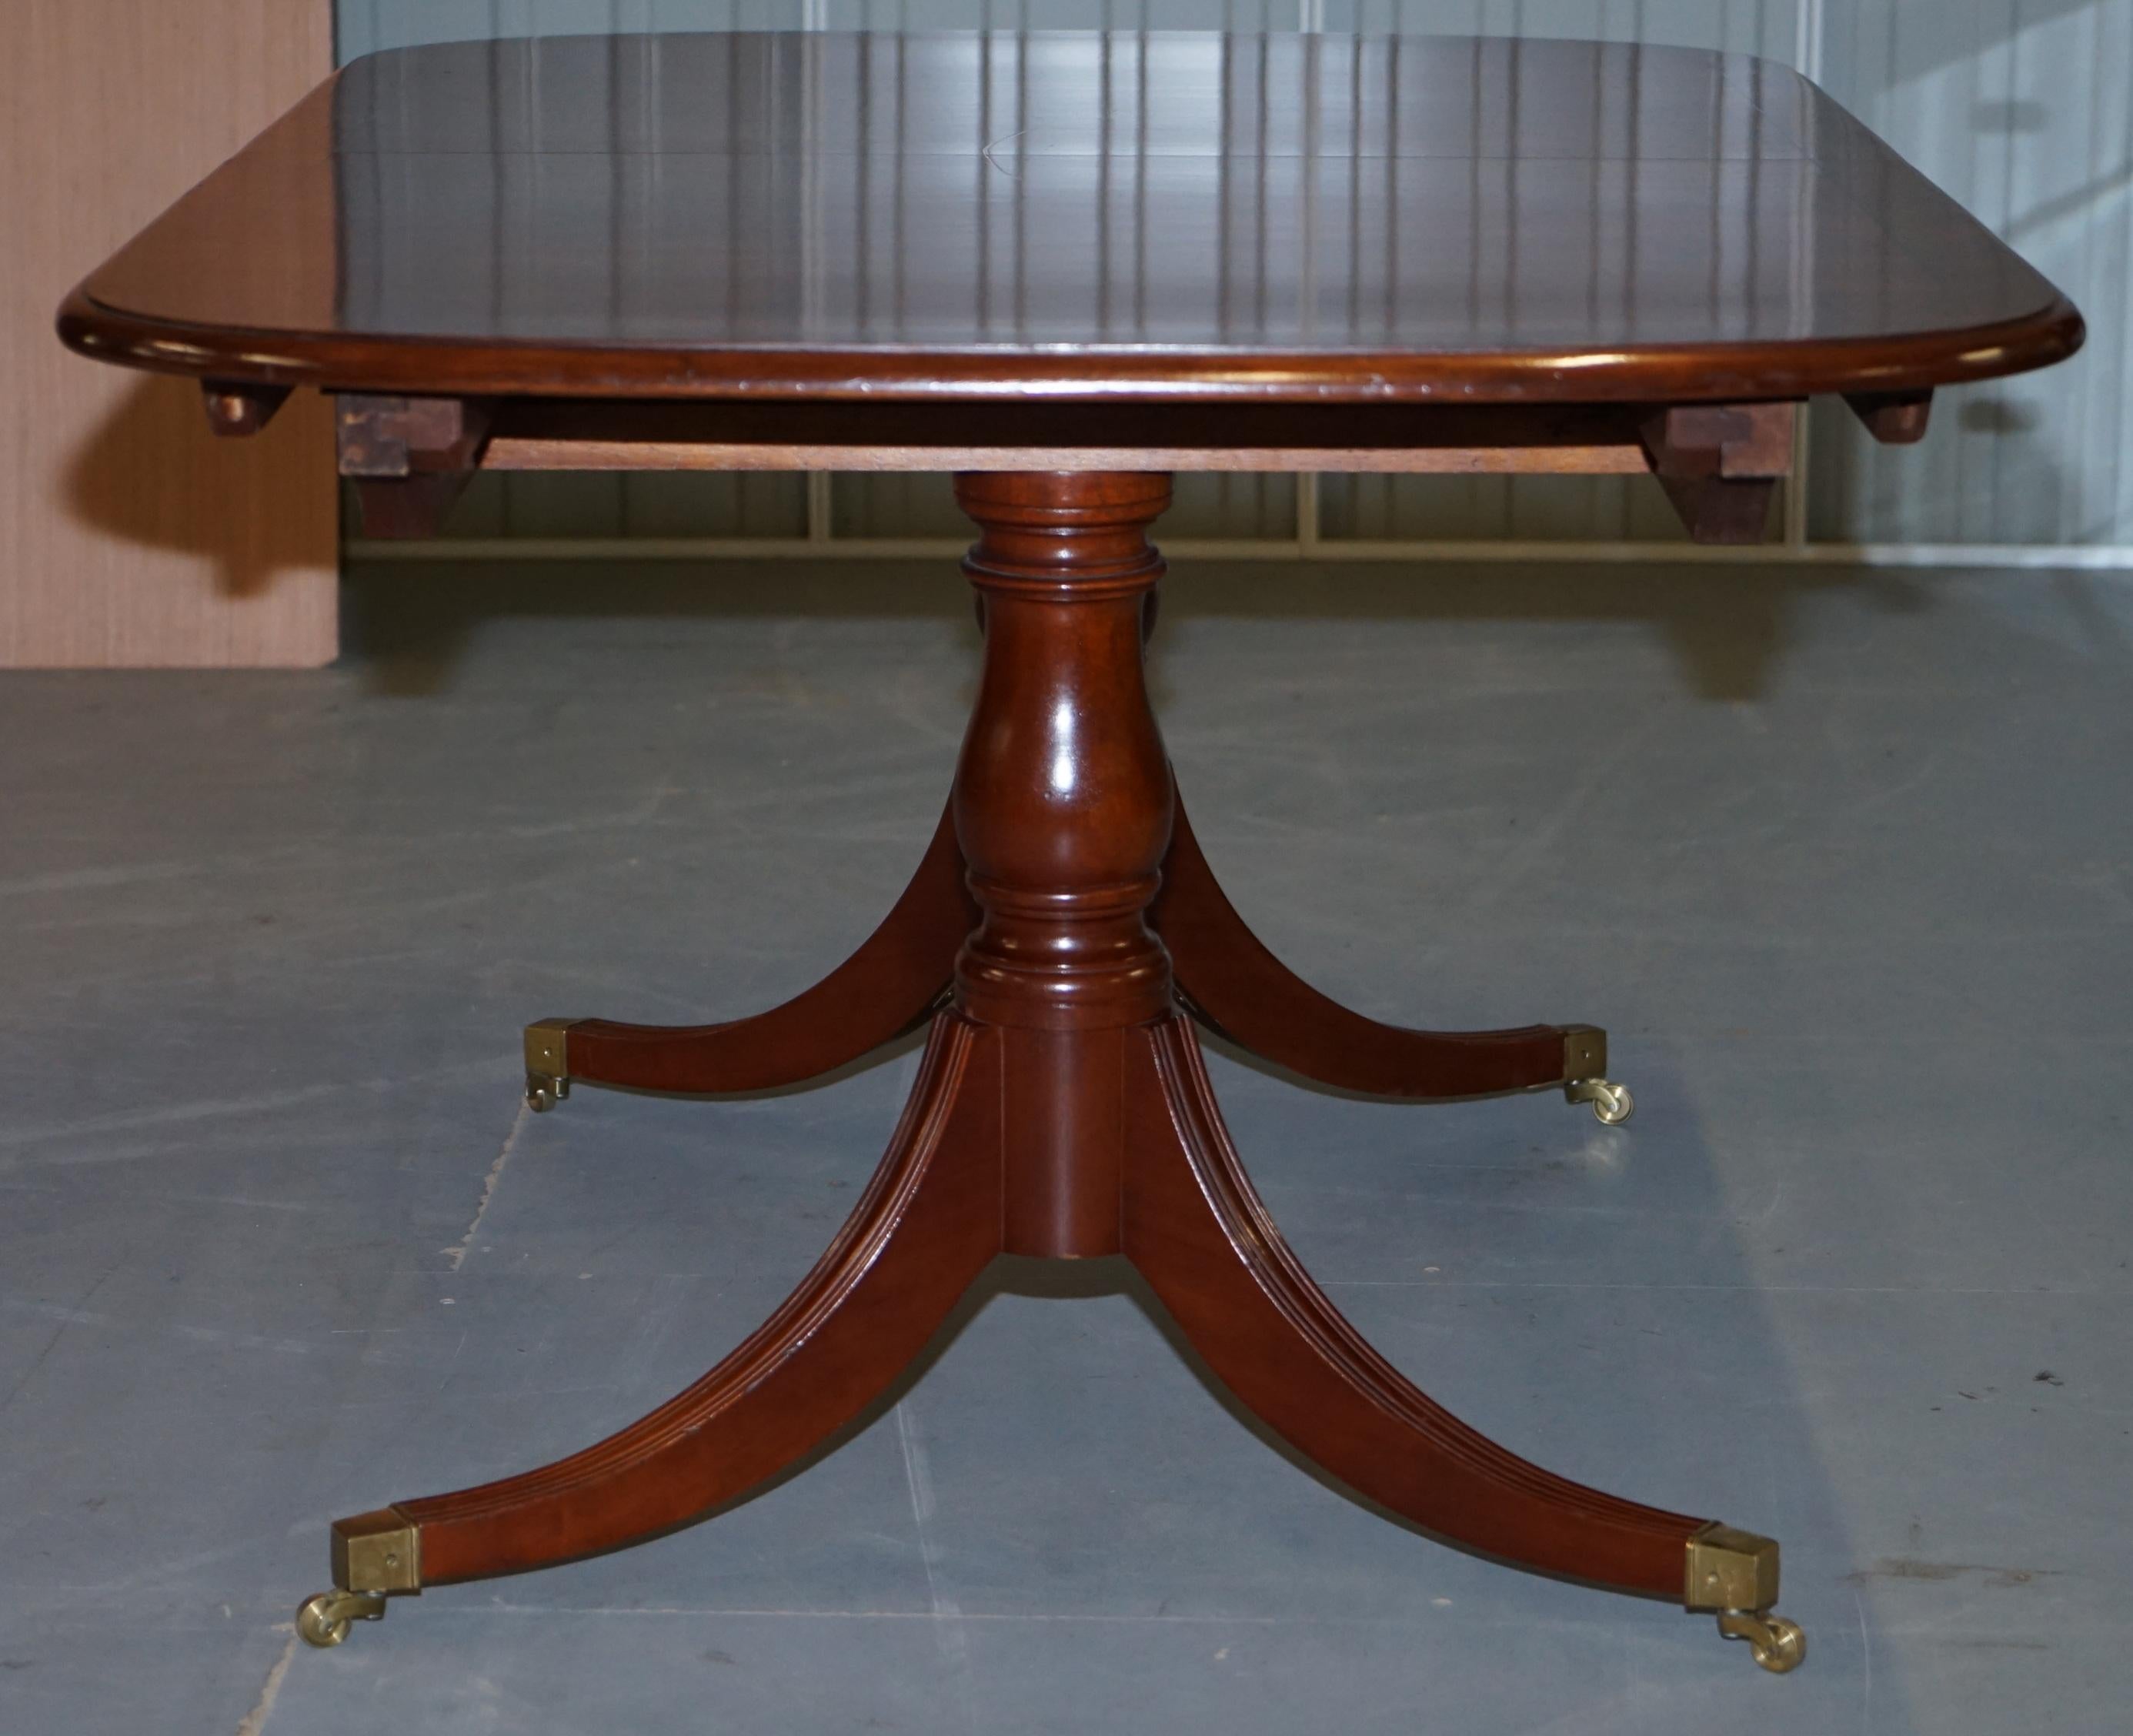 Hand-Crafted Brights of Nettlebed Burr Walnut Regency Extending Dining Table Chairs